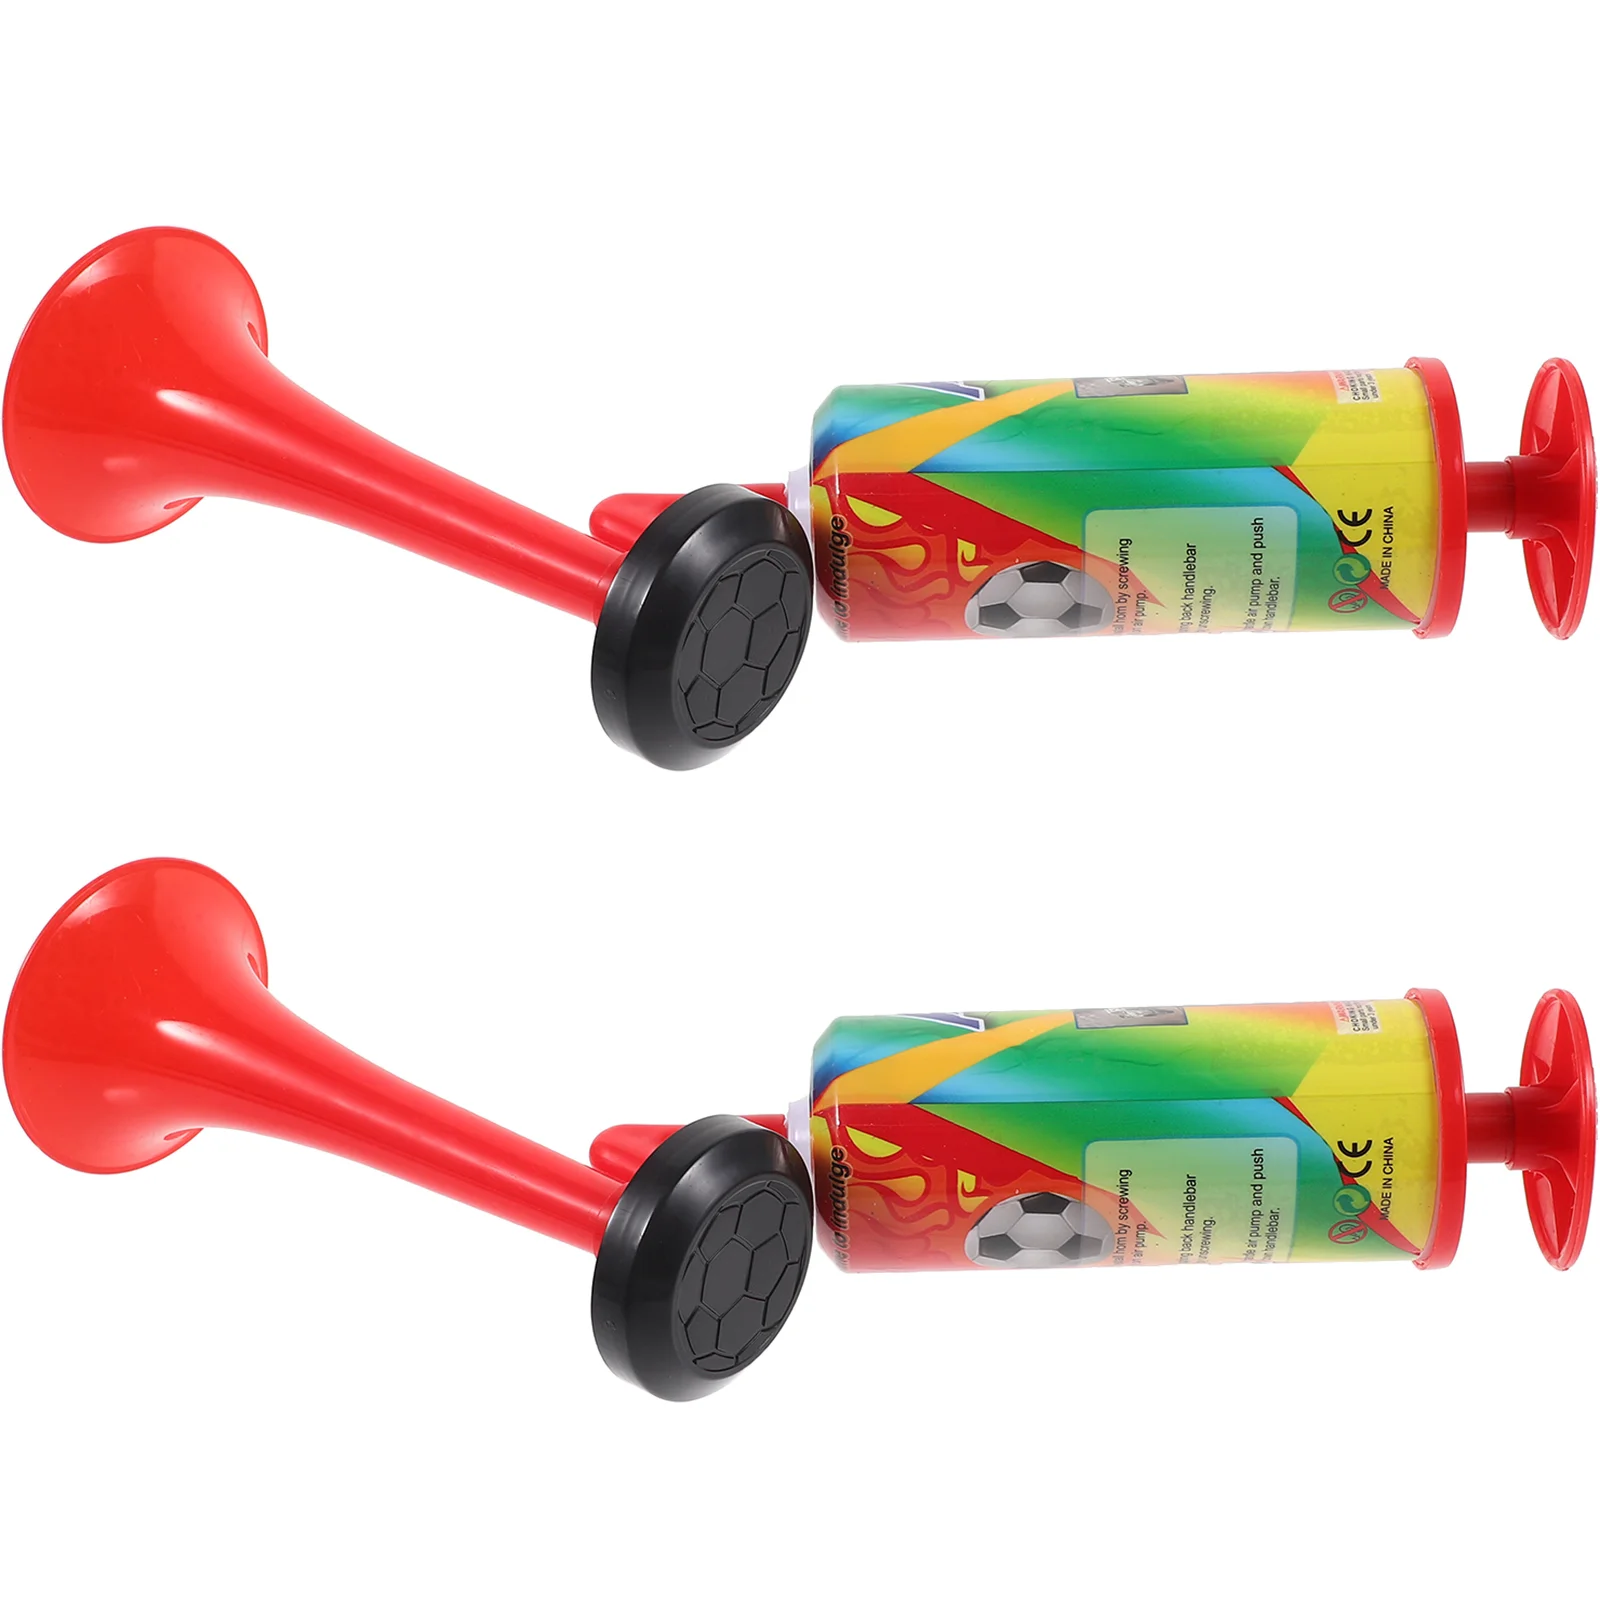 

1/2pcs Hand Held Air Horn Pump Trumpet Loud Noise Maker Safety Football Soccer Sports Events Cheering Props Random Color